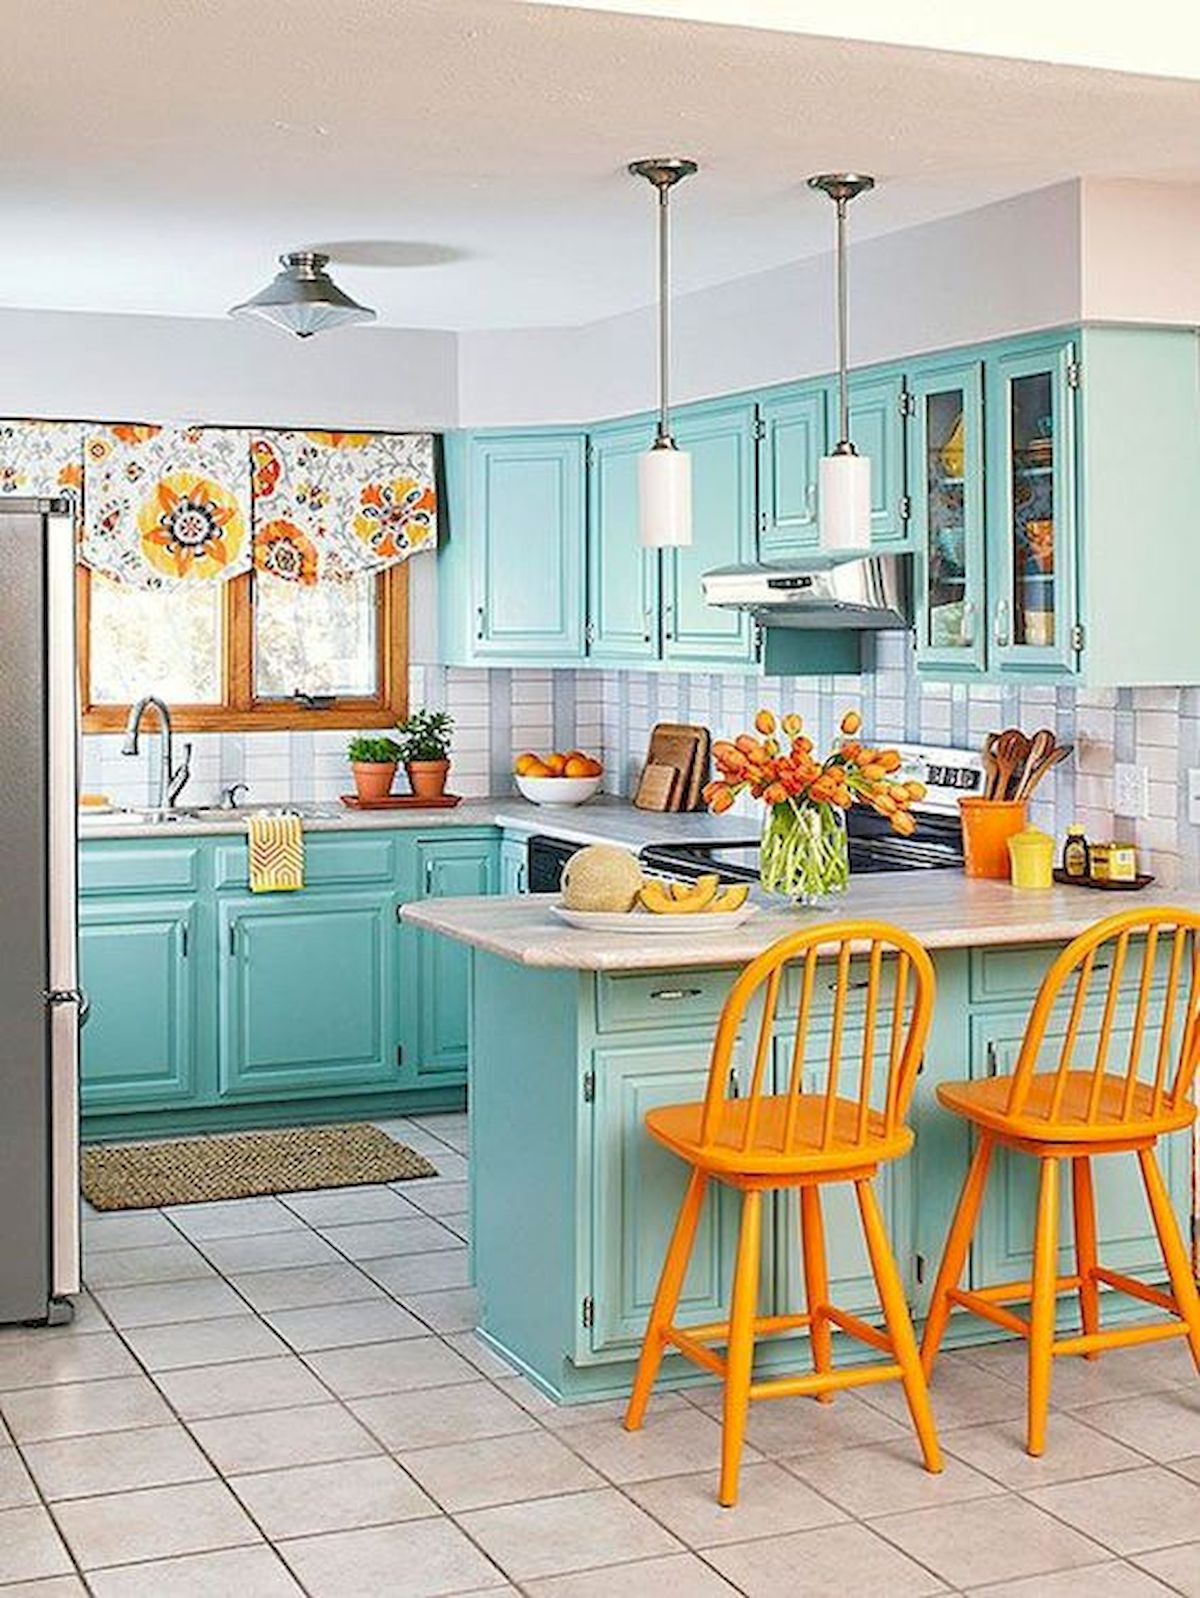 90 Amazing Kitchen Remodel And Decor Ideas With Colorful Design (4)